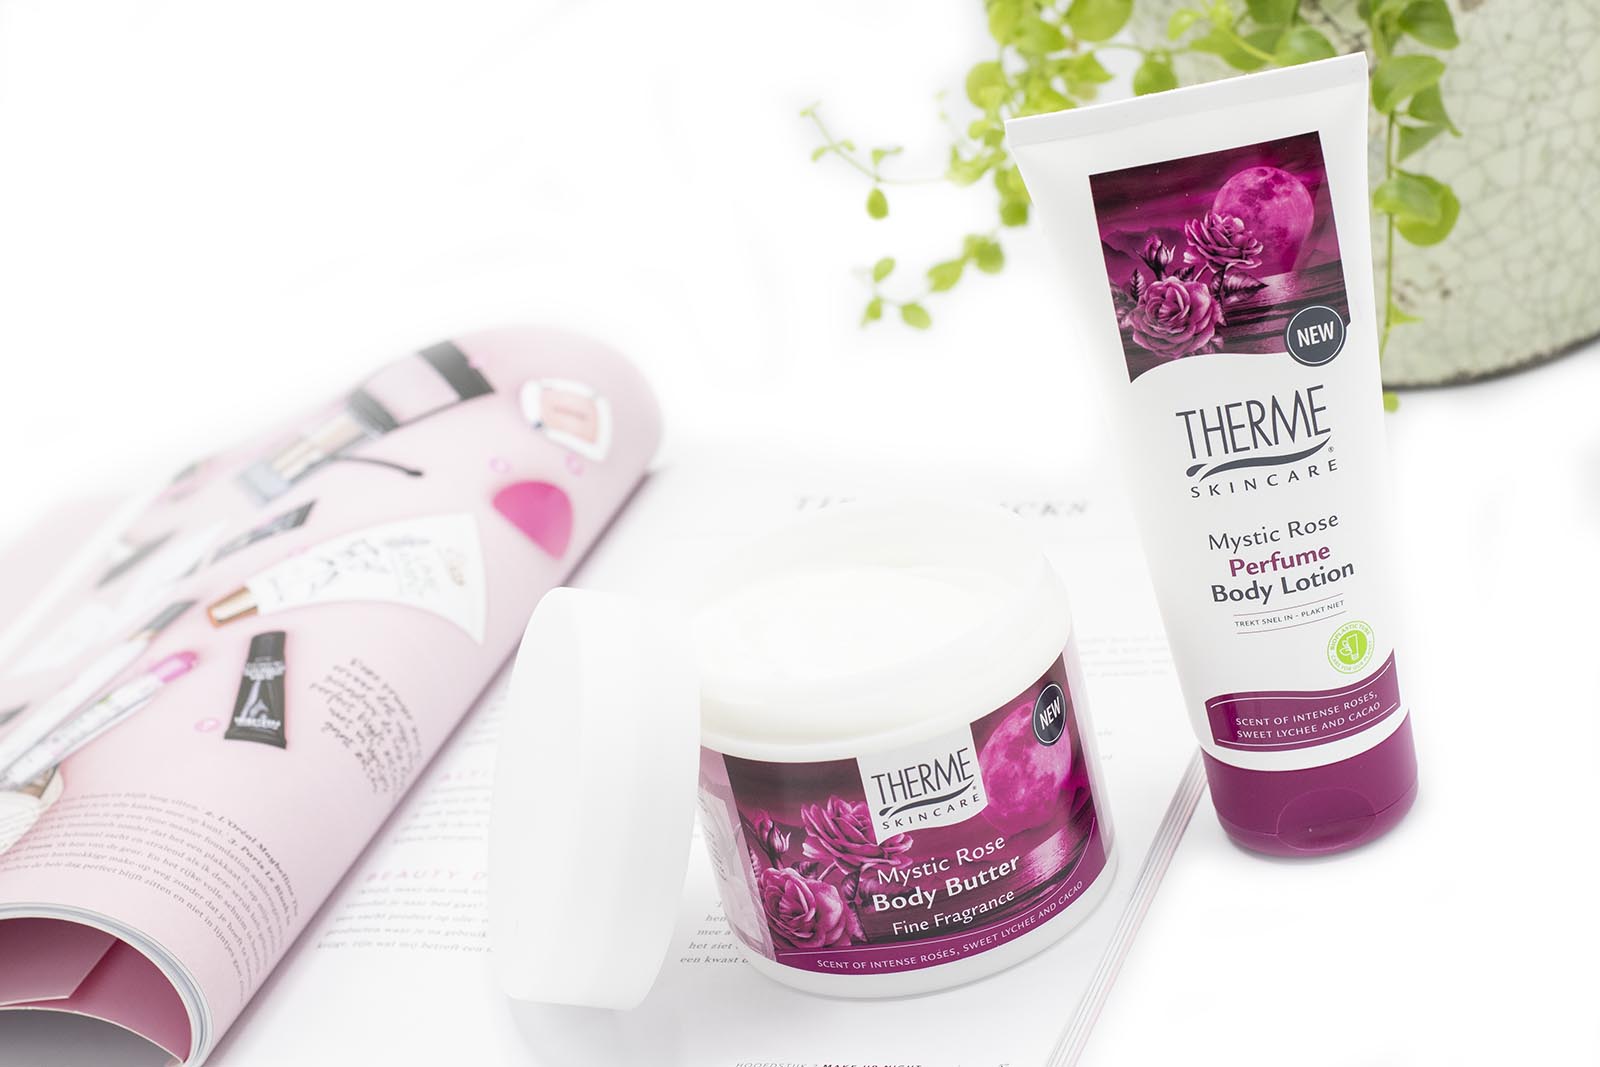 Therme mystic rose body butter